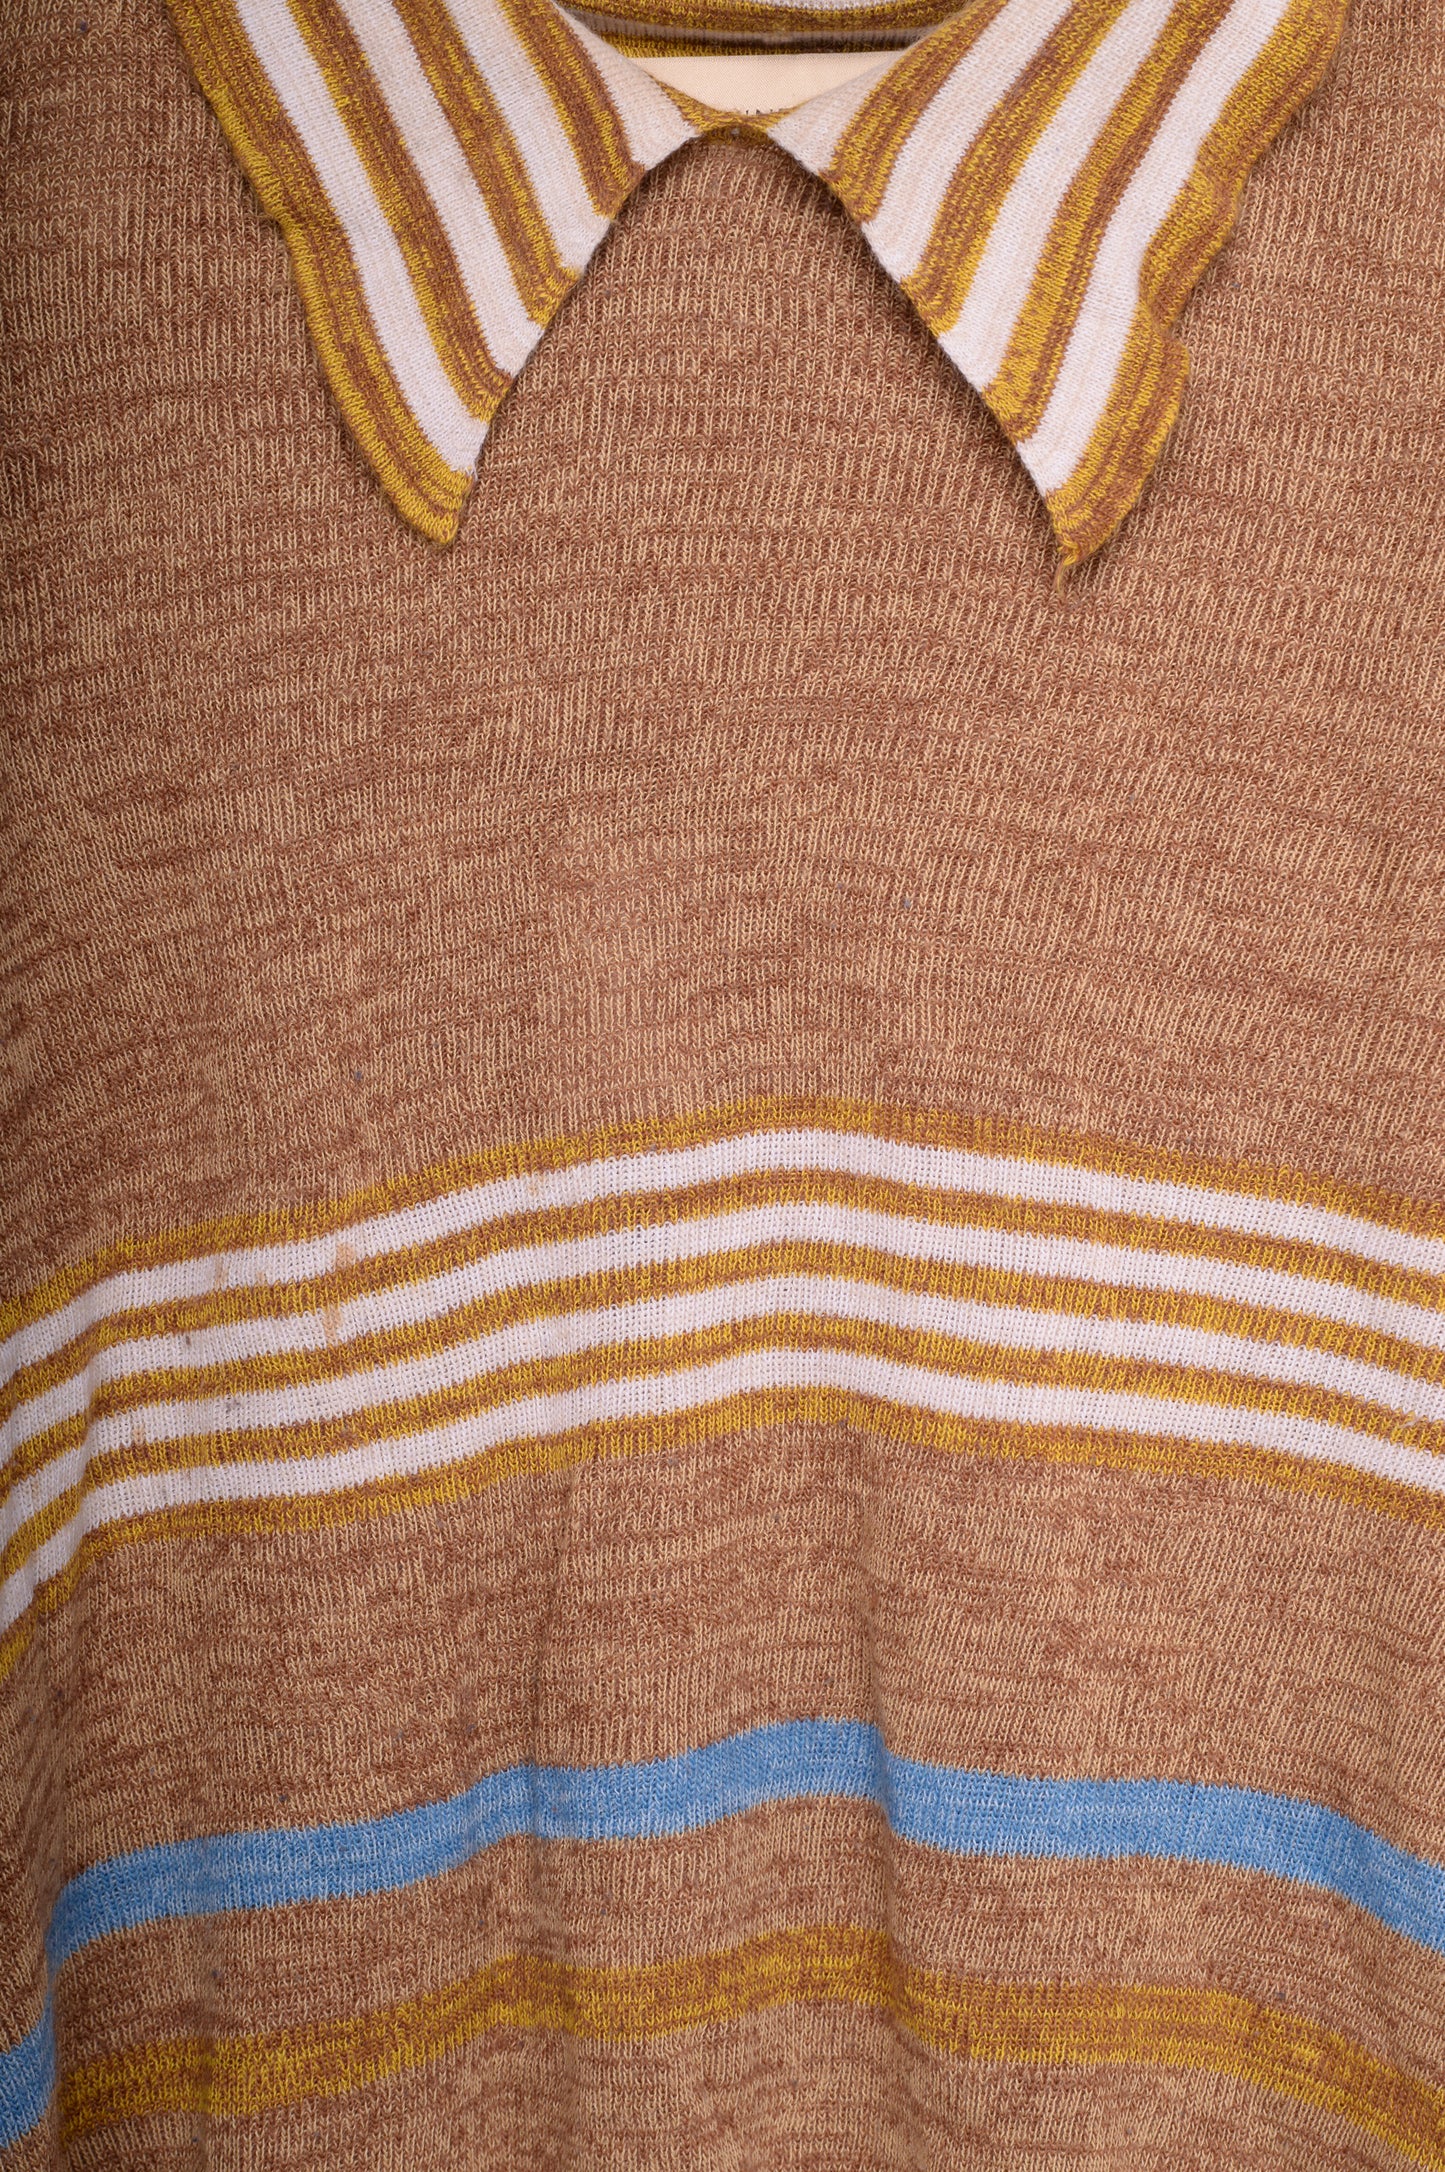 1970s Knit Collared Top